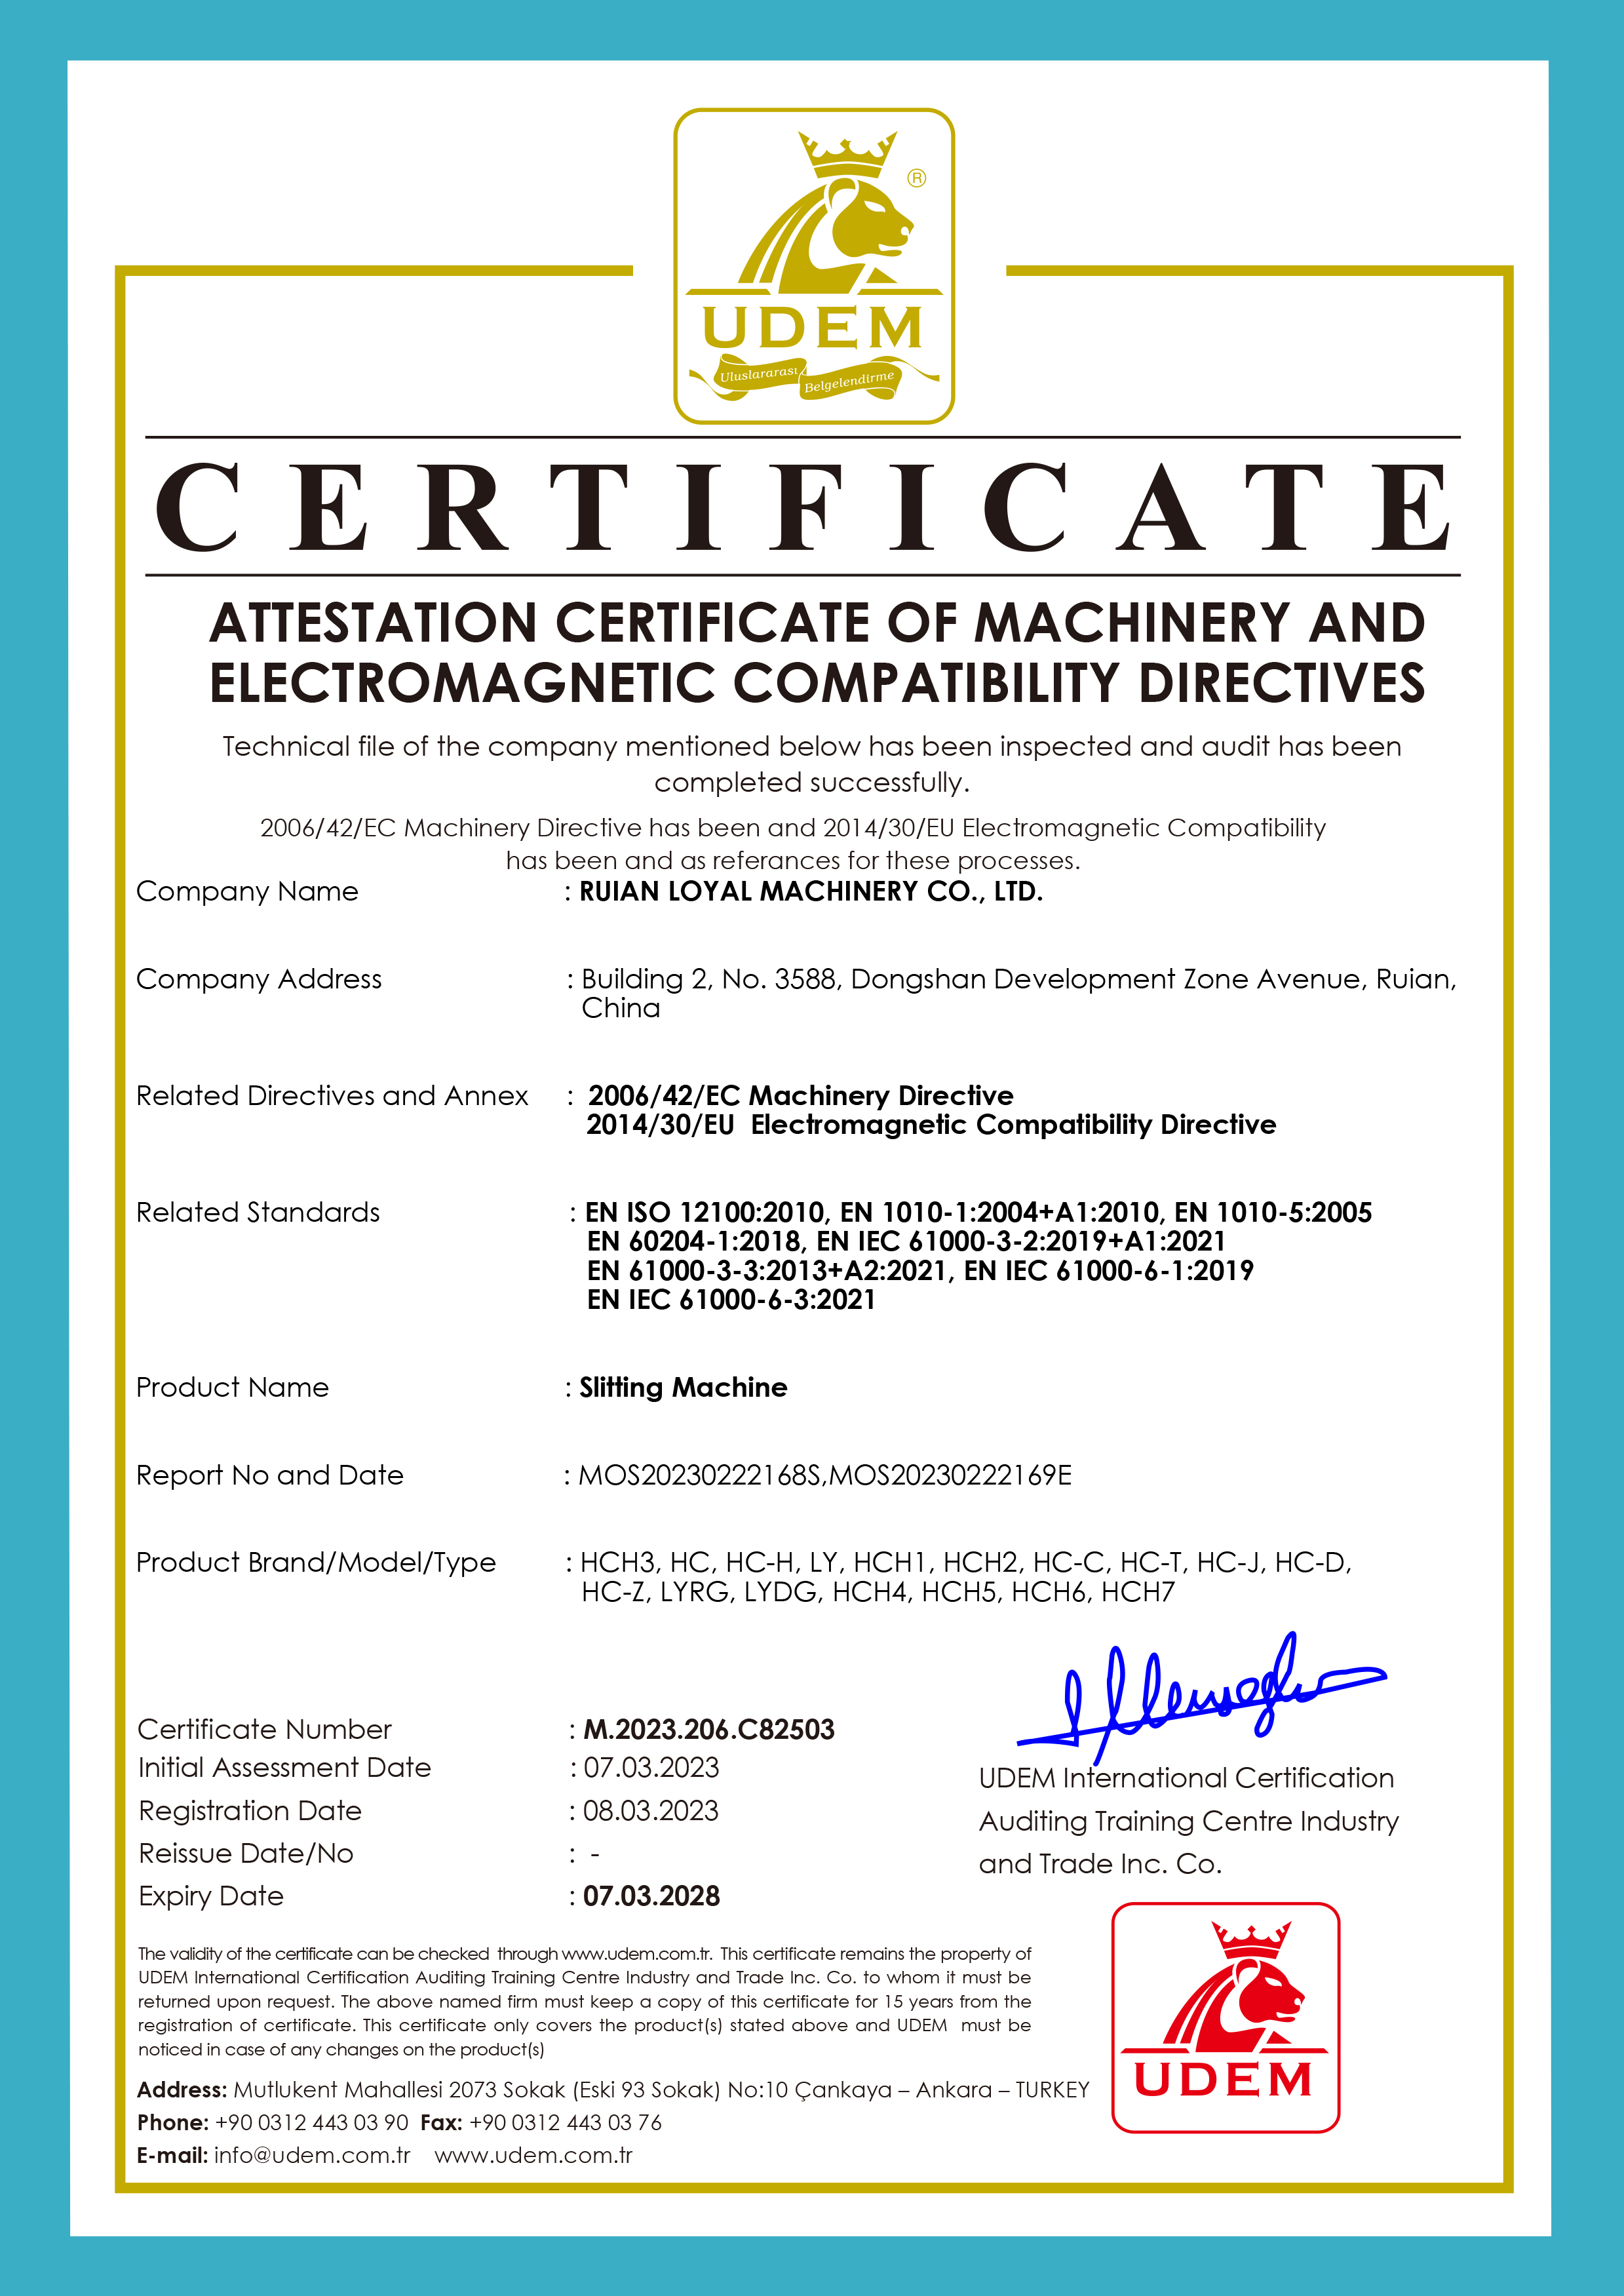 attestation certificate of machinery and electromagnetic compatibility directives